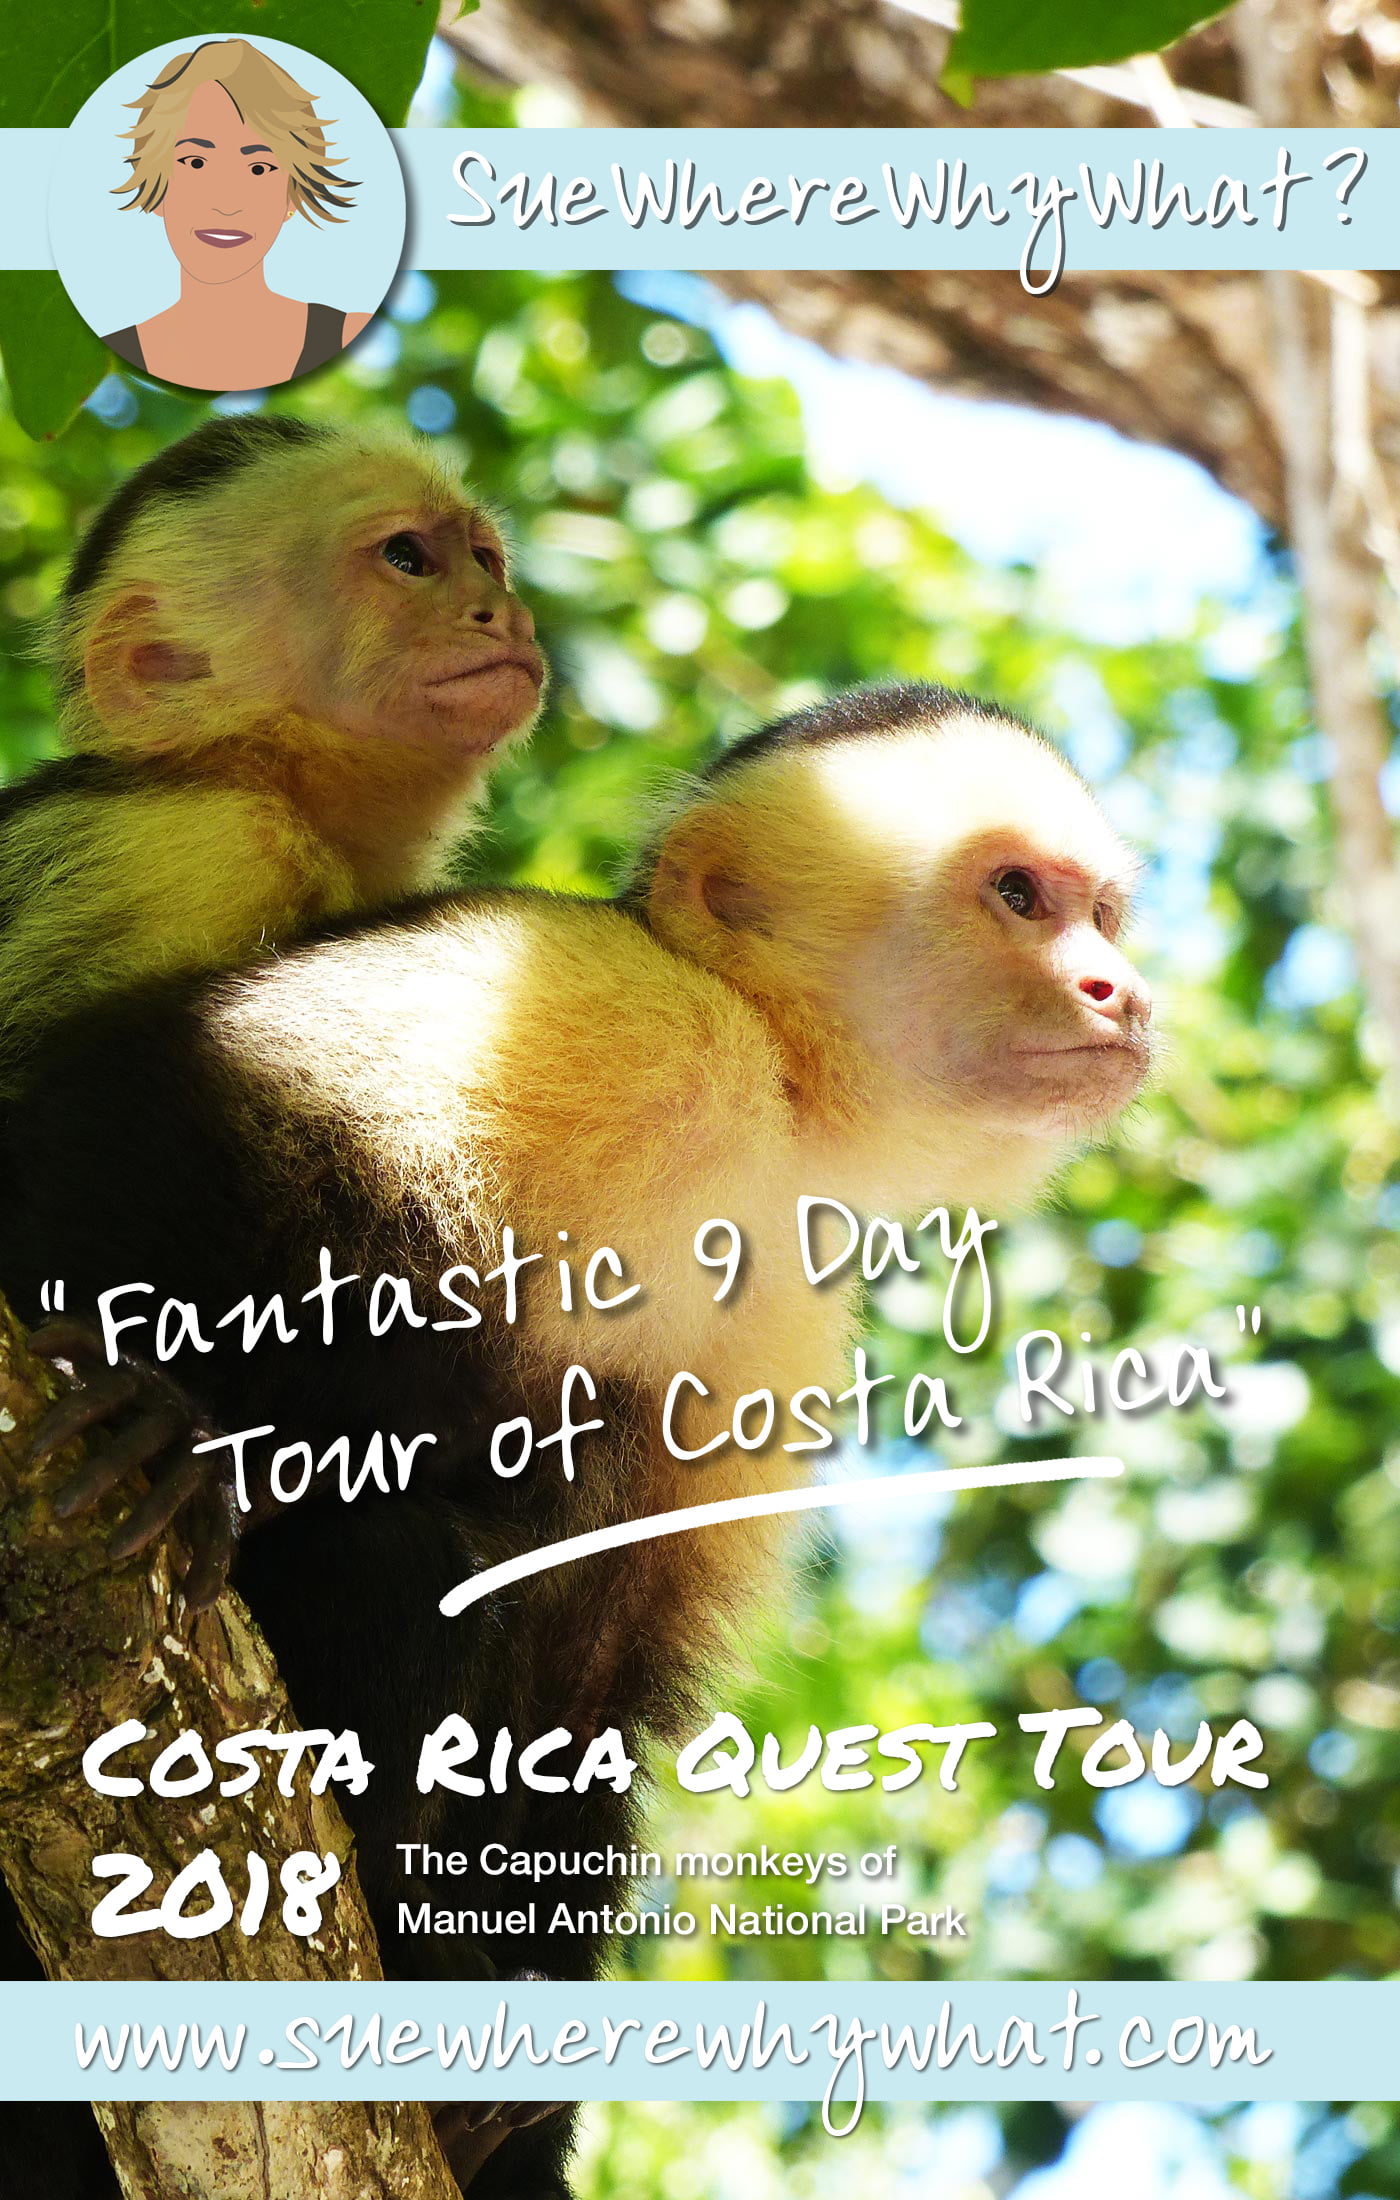 Fantastic 9 Day Tour of Costa Rica